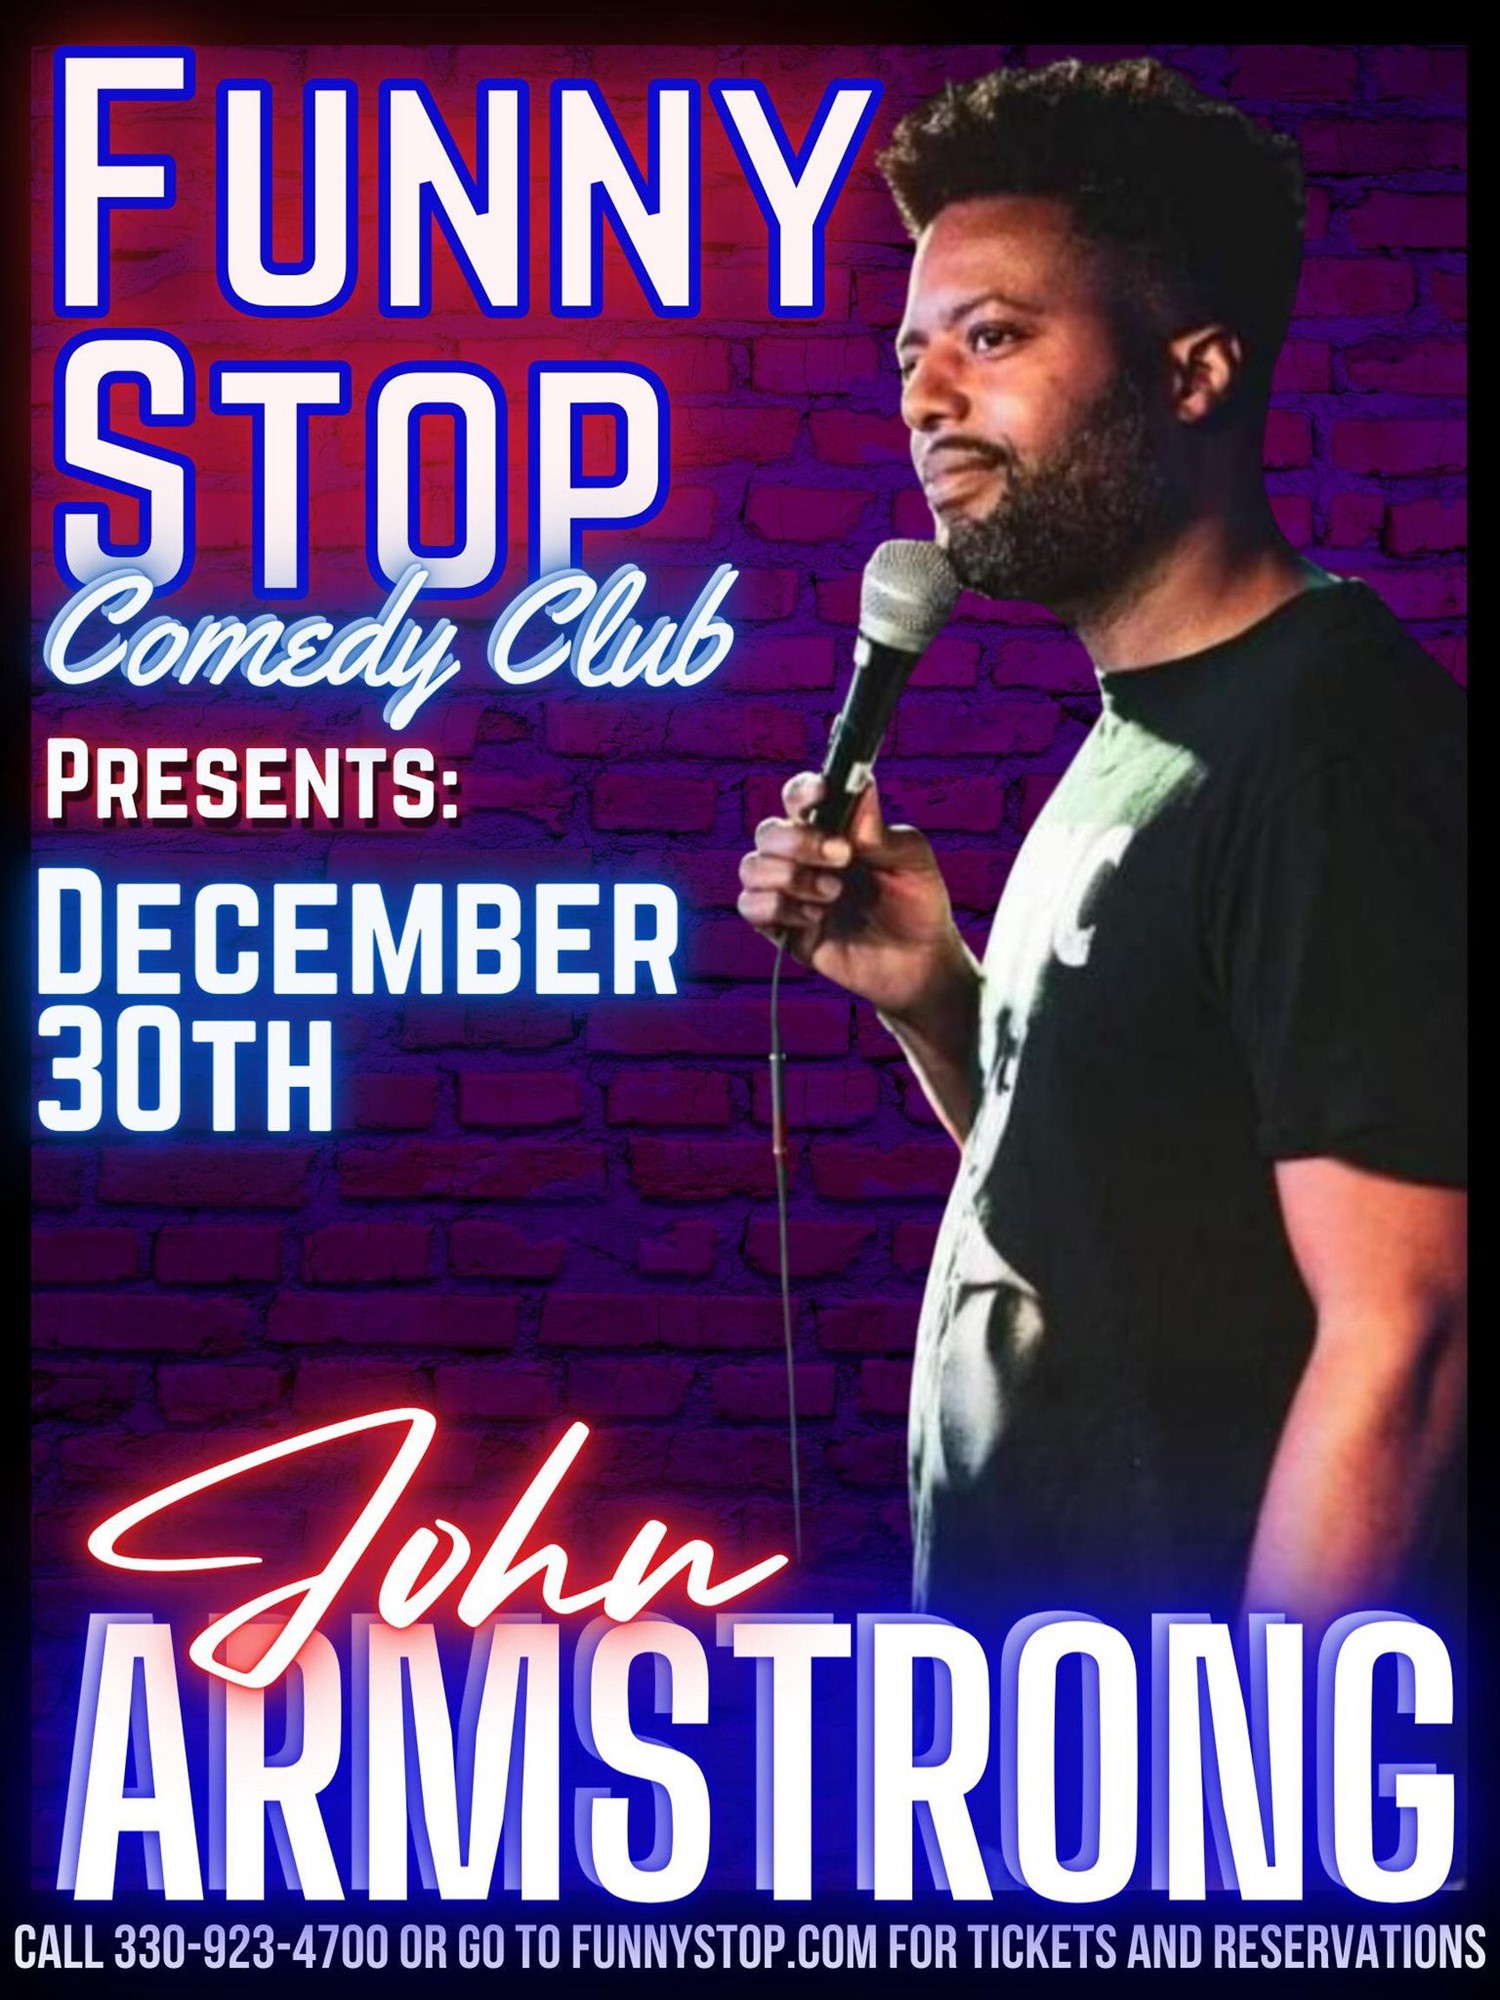 John Armstrong - Fri. 9:30PM Also featuring Nick Jordan and Chevy Terril at Funny Stop Comedy Club on dic. 30, 21:30@Funny Stop Comedy Club - Compra entradas y obtén información enFunny Stop funnystop.online